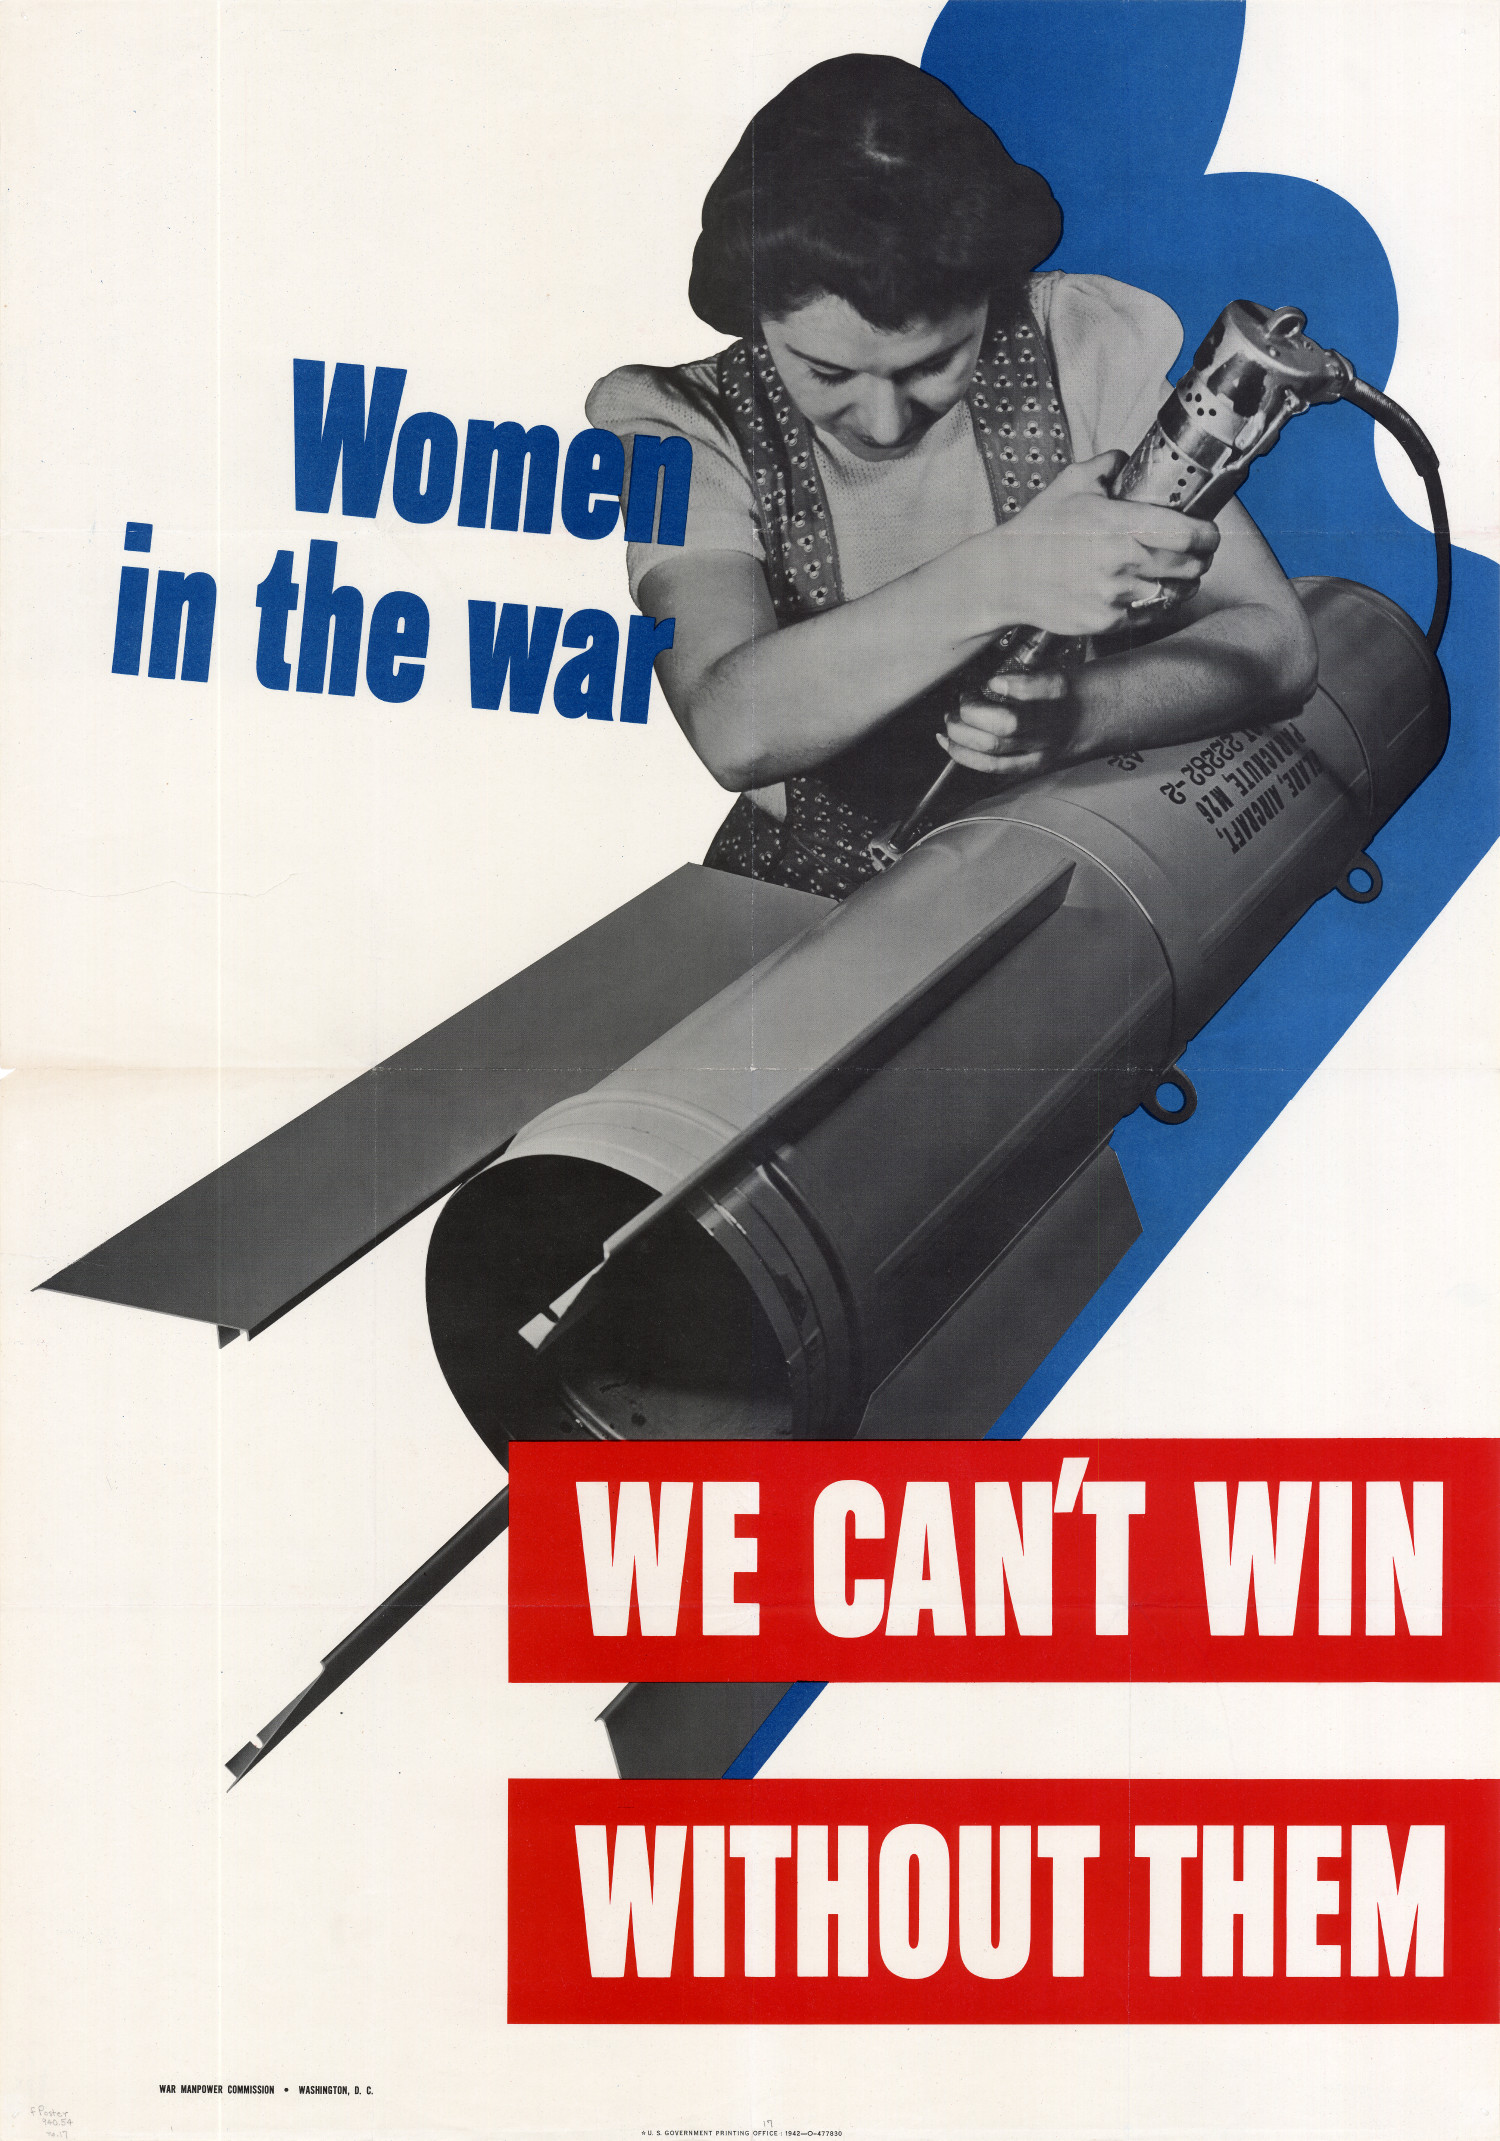 Women in the war : we can't win without them. - UNT Digital Library